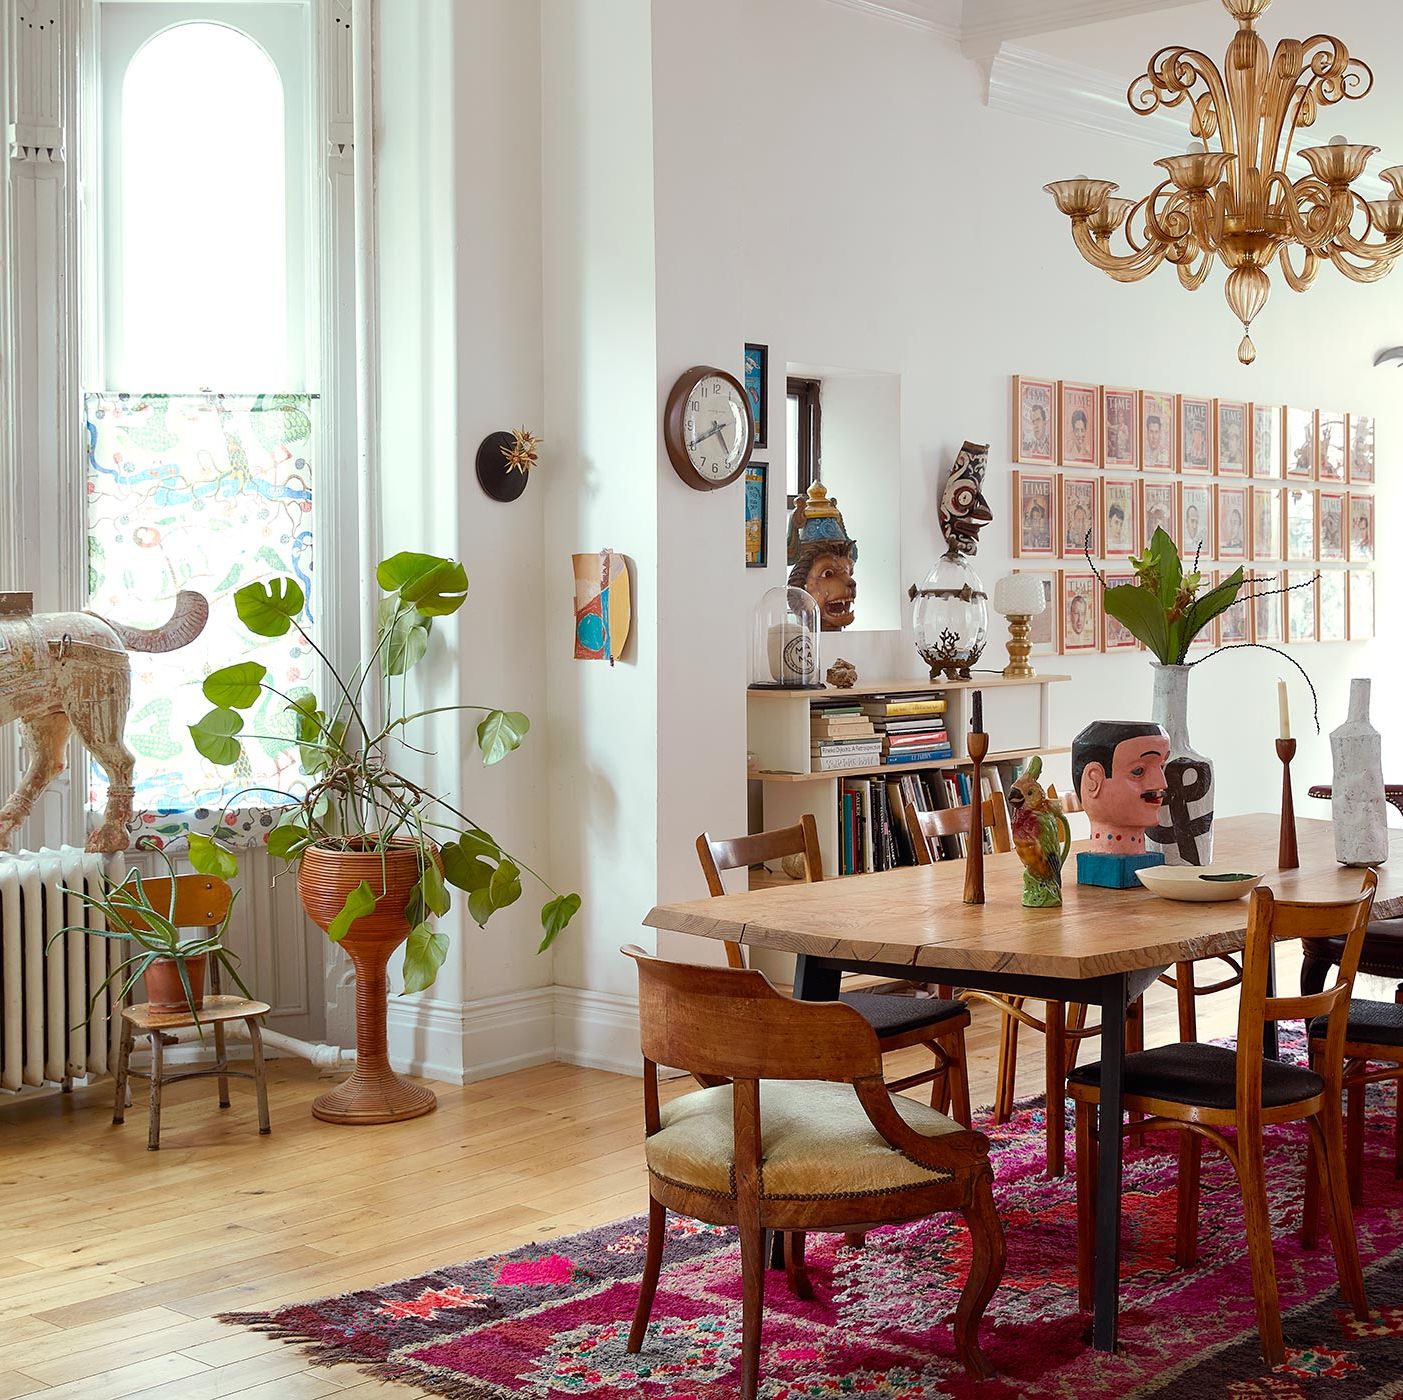 A Brooklyn Brownstone Filled With International Treasures—and a Trapeze!